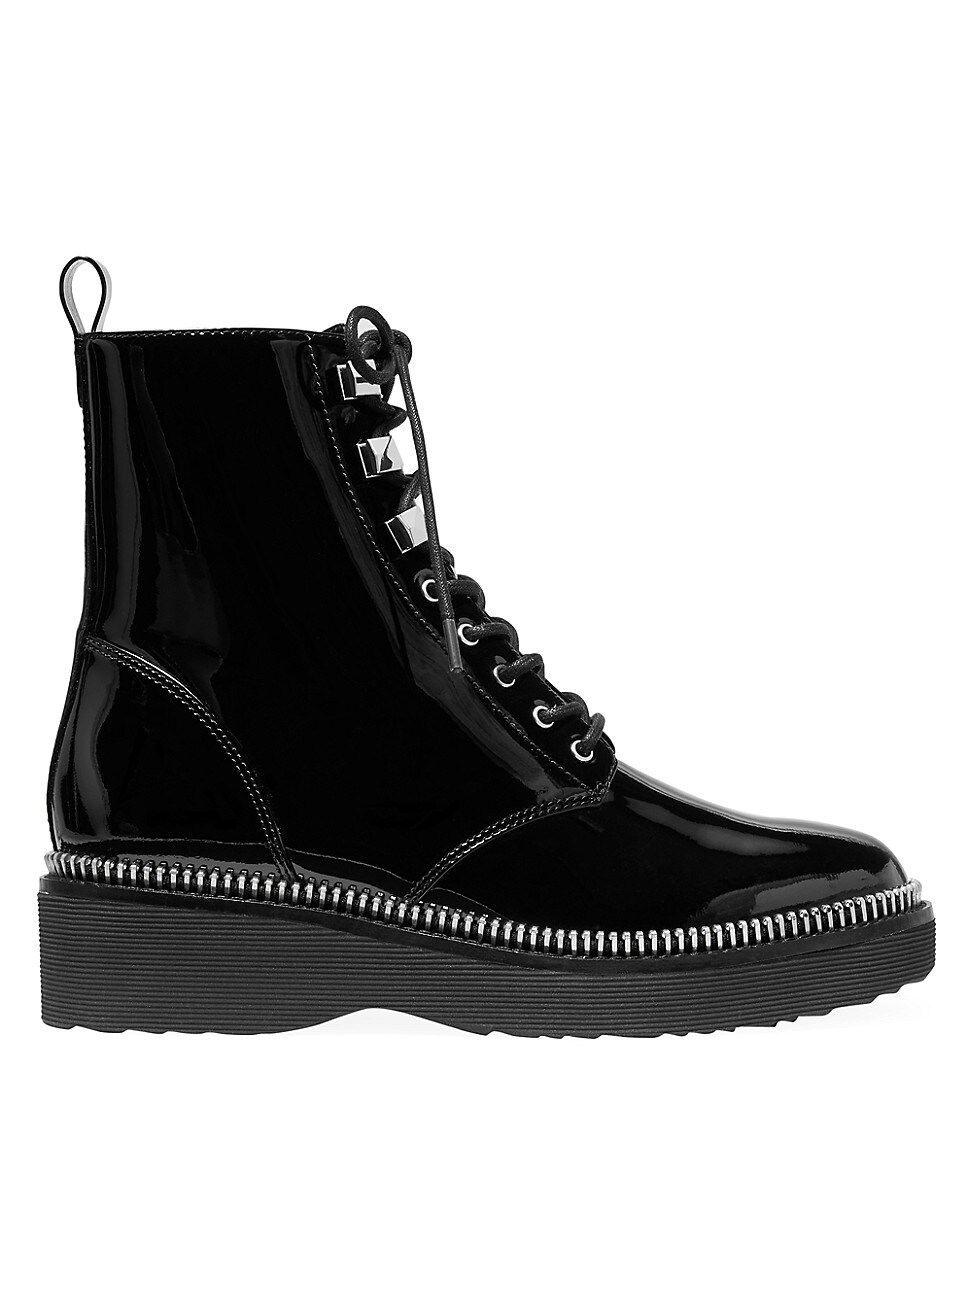 MICHAEL Michael Kors Haskell Patent Leather Combat Boots | Saks Fifth Avenue